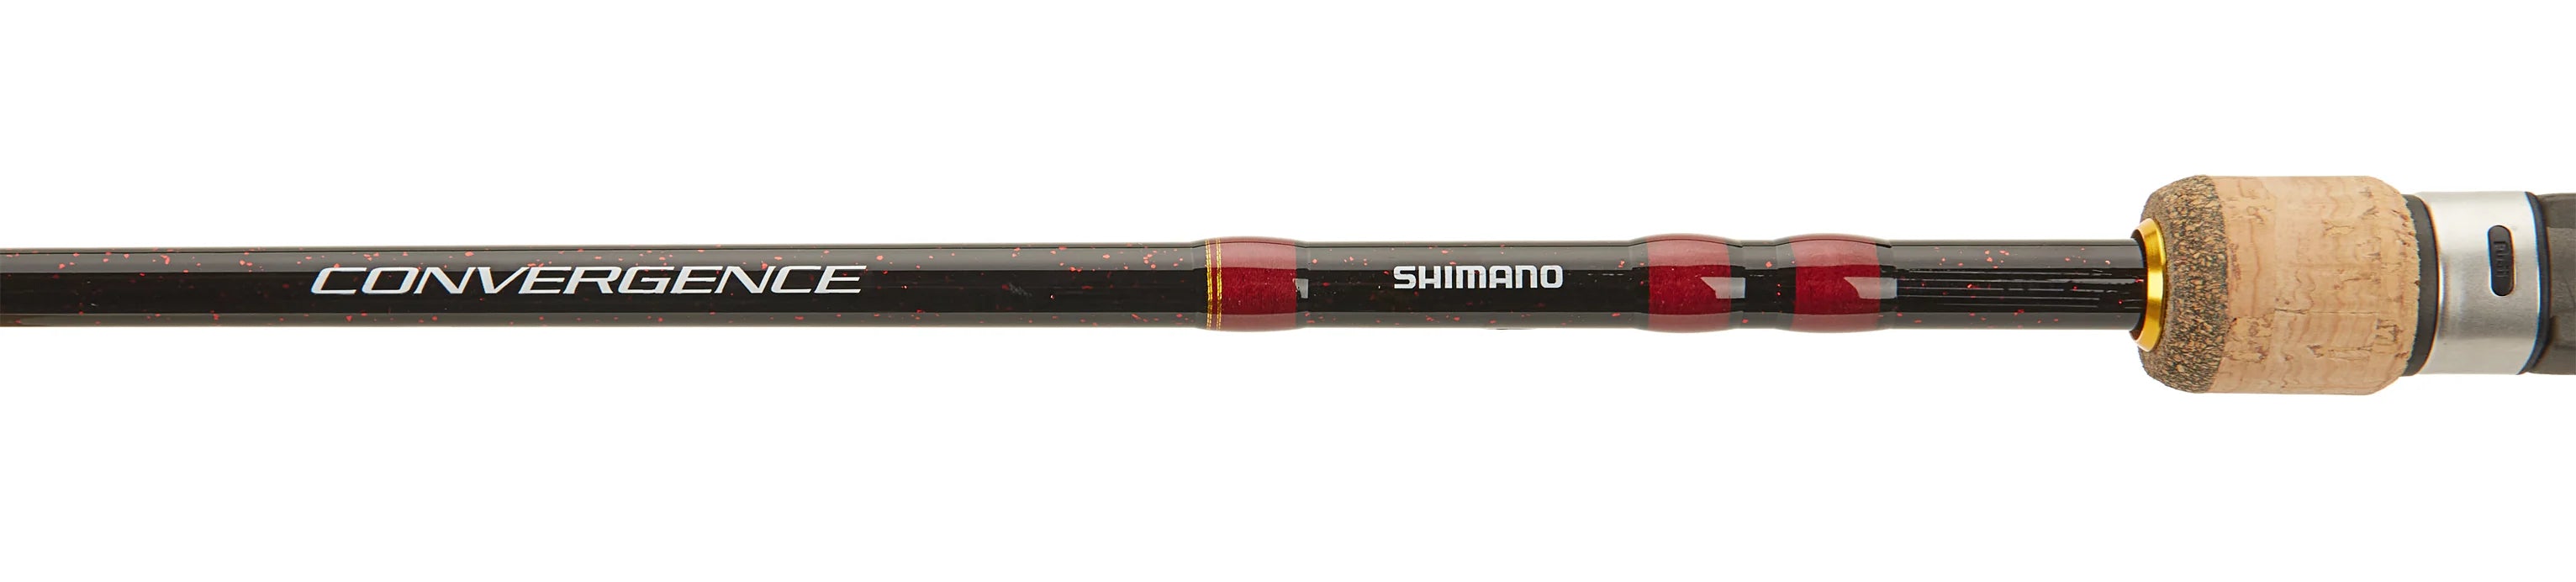 SHIMANO CONVERGENCE D CASTING RODS - 0